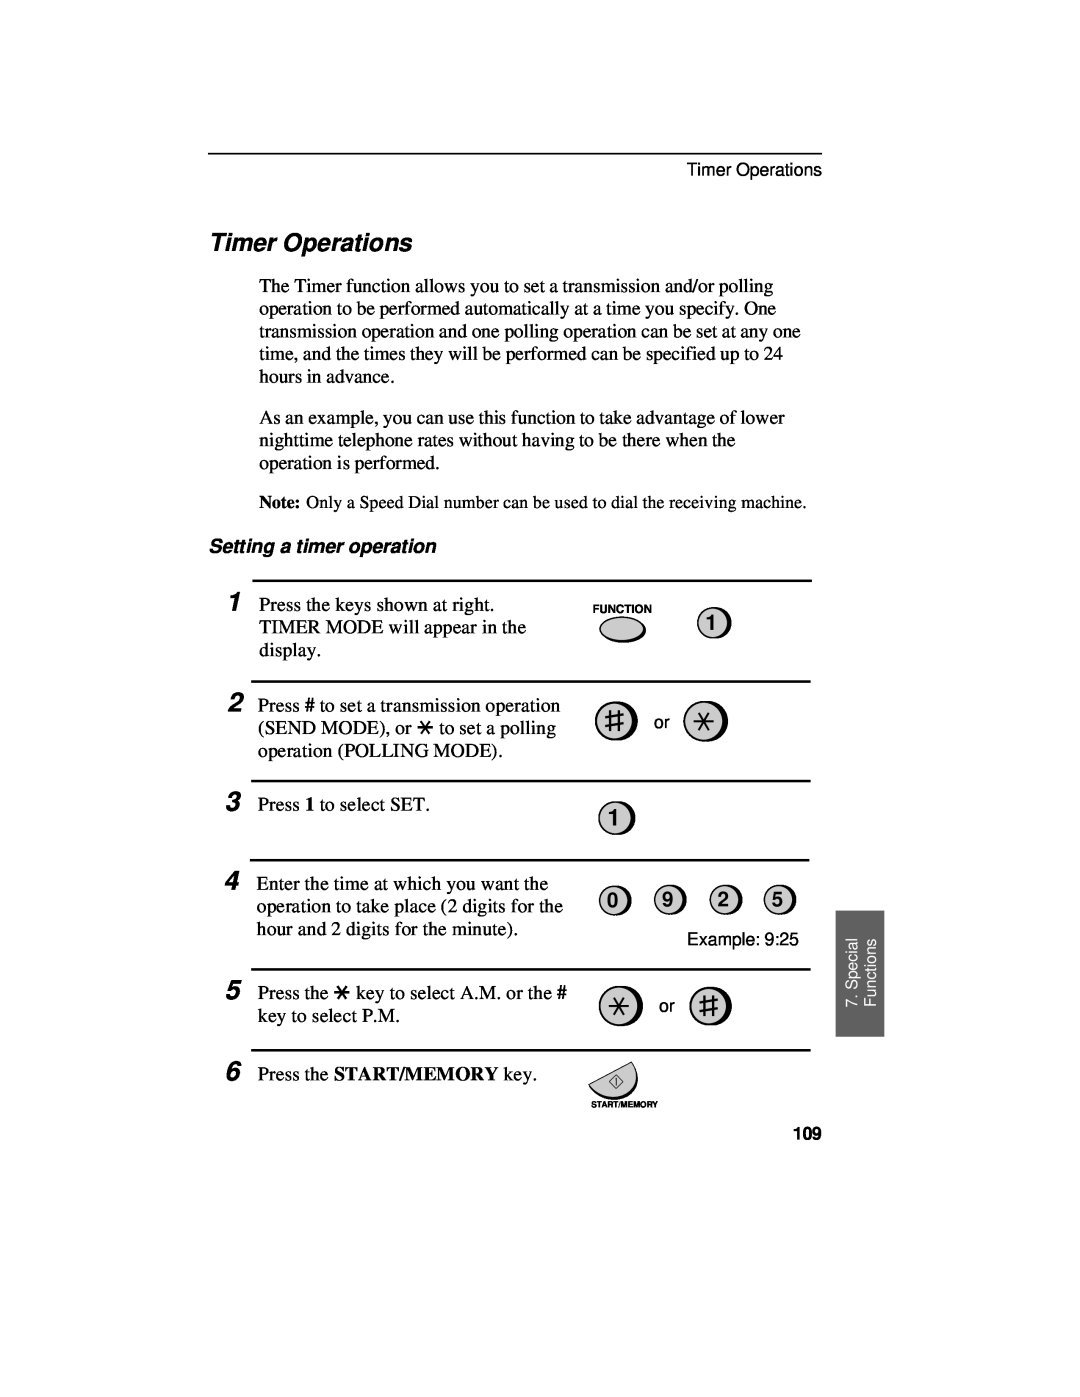 Sharp UX-460 operation manual Timer Operations, Setting a timer operation 